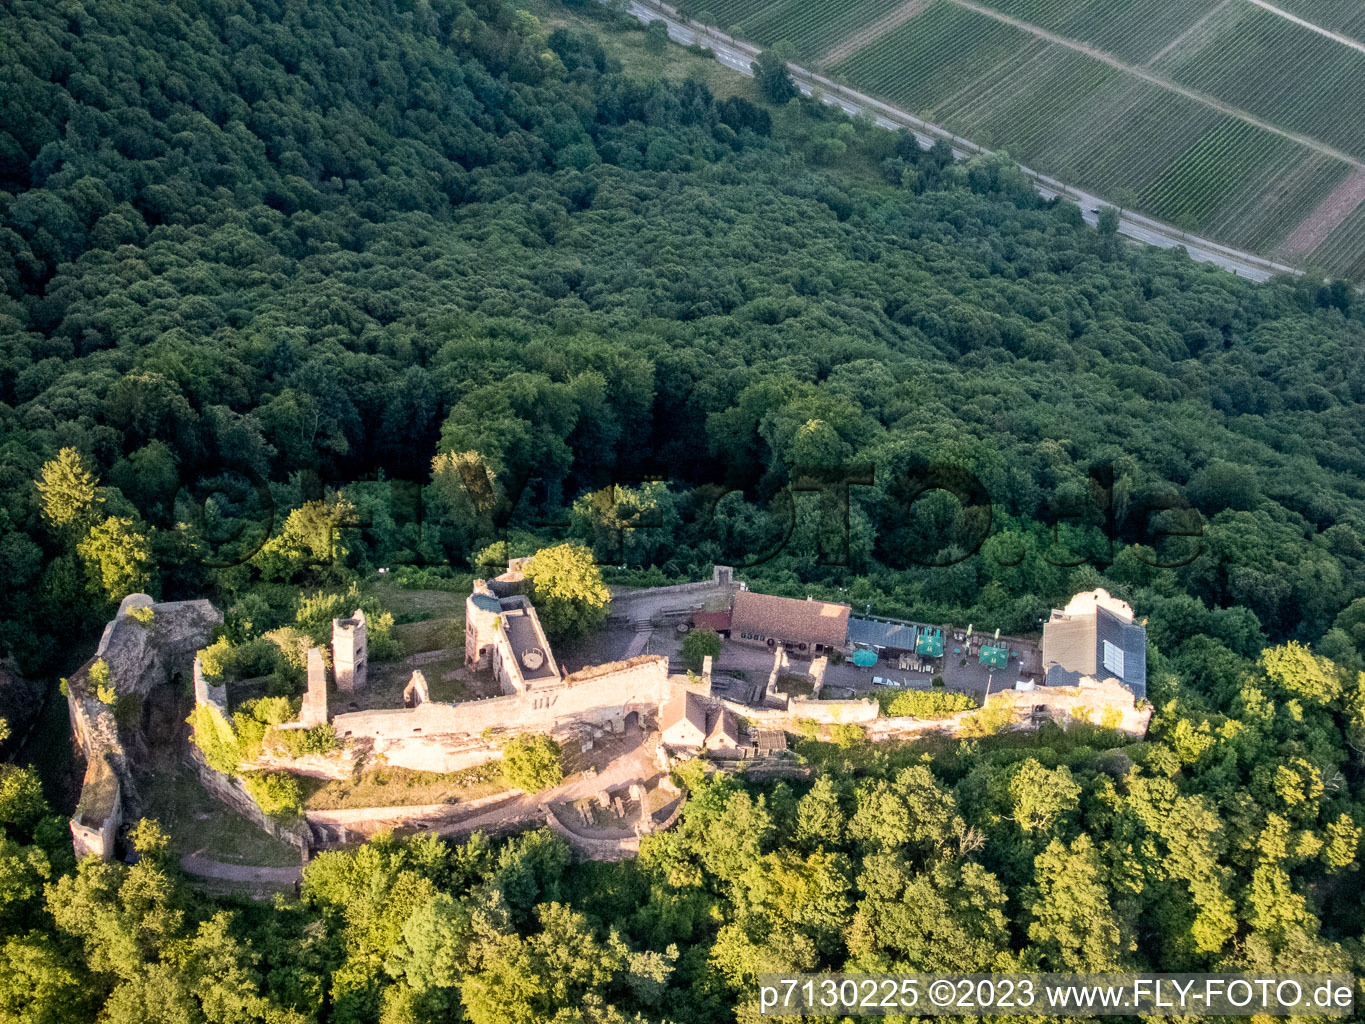 Madenburg in Eschbach in the state Rhineland-Palatinate, Germany from above